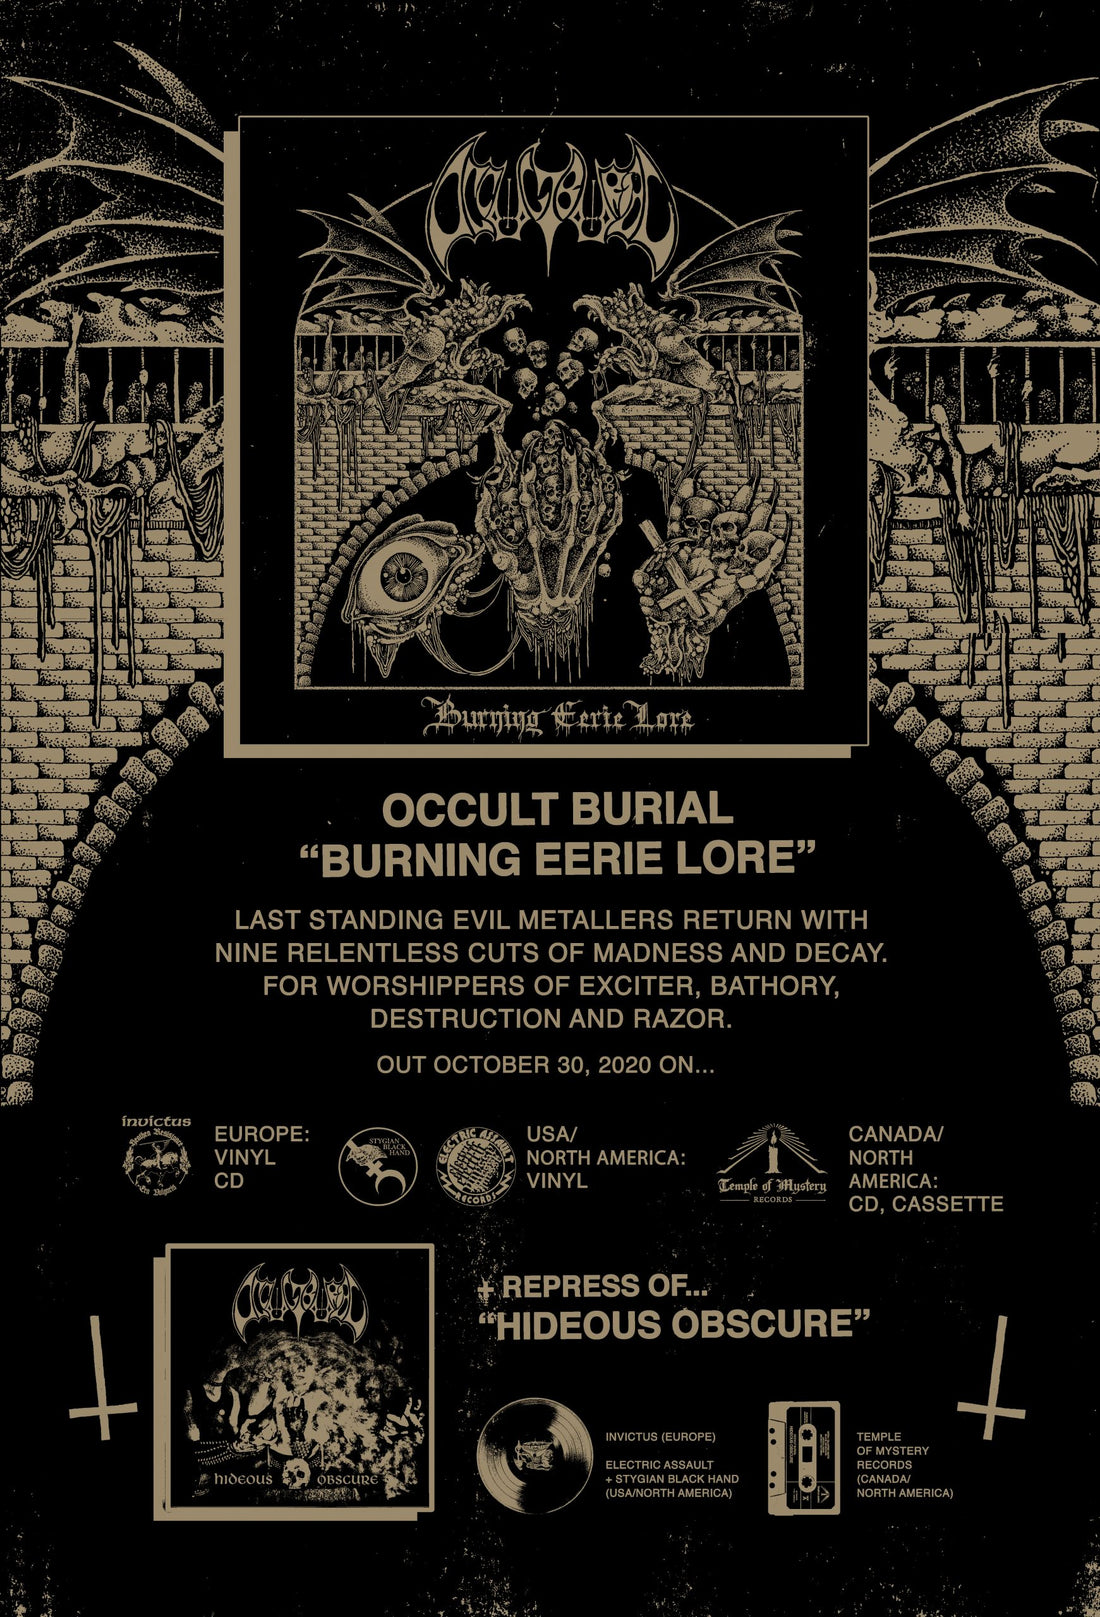 Occult Burial 'Burning Eerie Lore' LP/CD/DGTL out Friday October 30th!